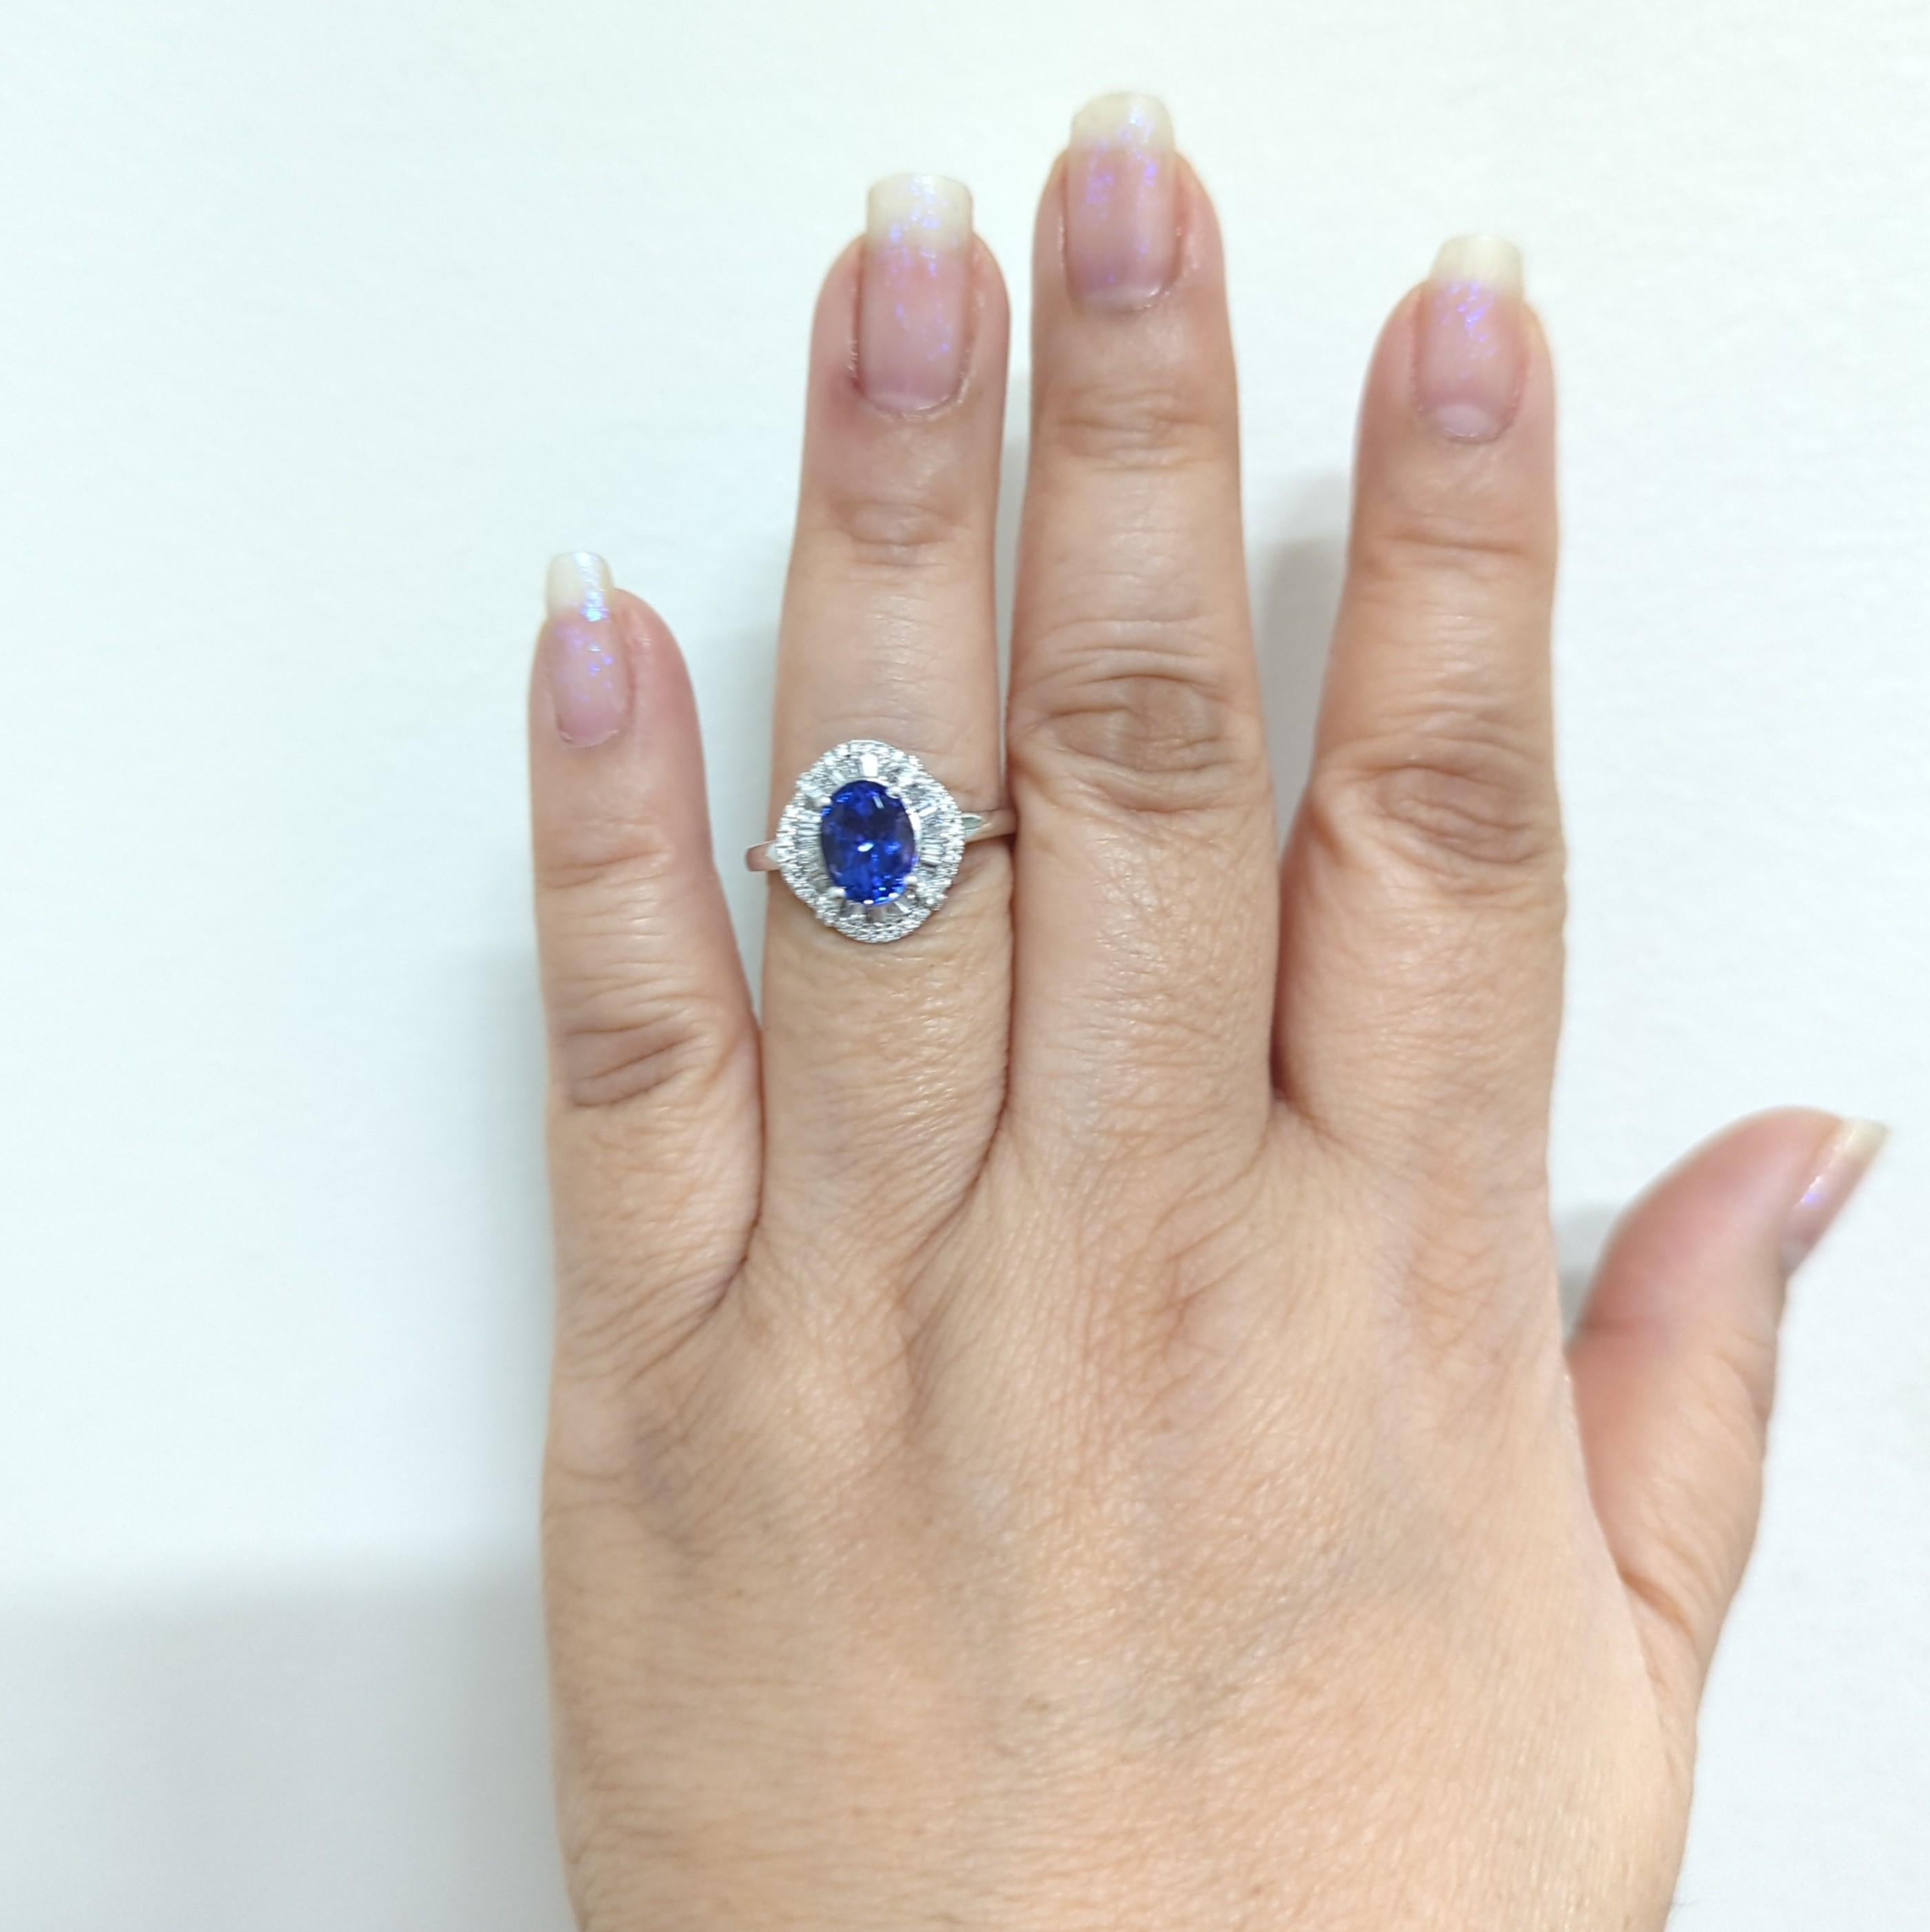 Gorgeous tanzanite oval that weighs 2.15 cts.  The stone looks bigger than the weight and has a beautiful blue purple hue.  The diamonds are white and good quality.  The design is unique and detailed.  Handmade ring in 14k white gold and size 9. 